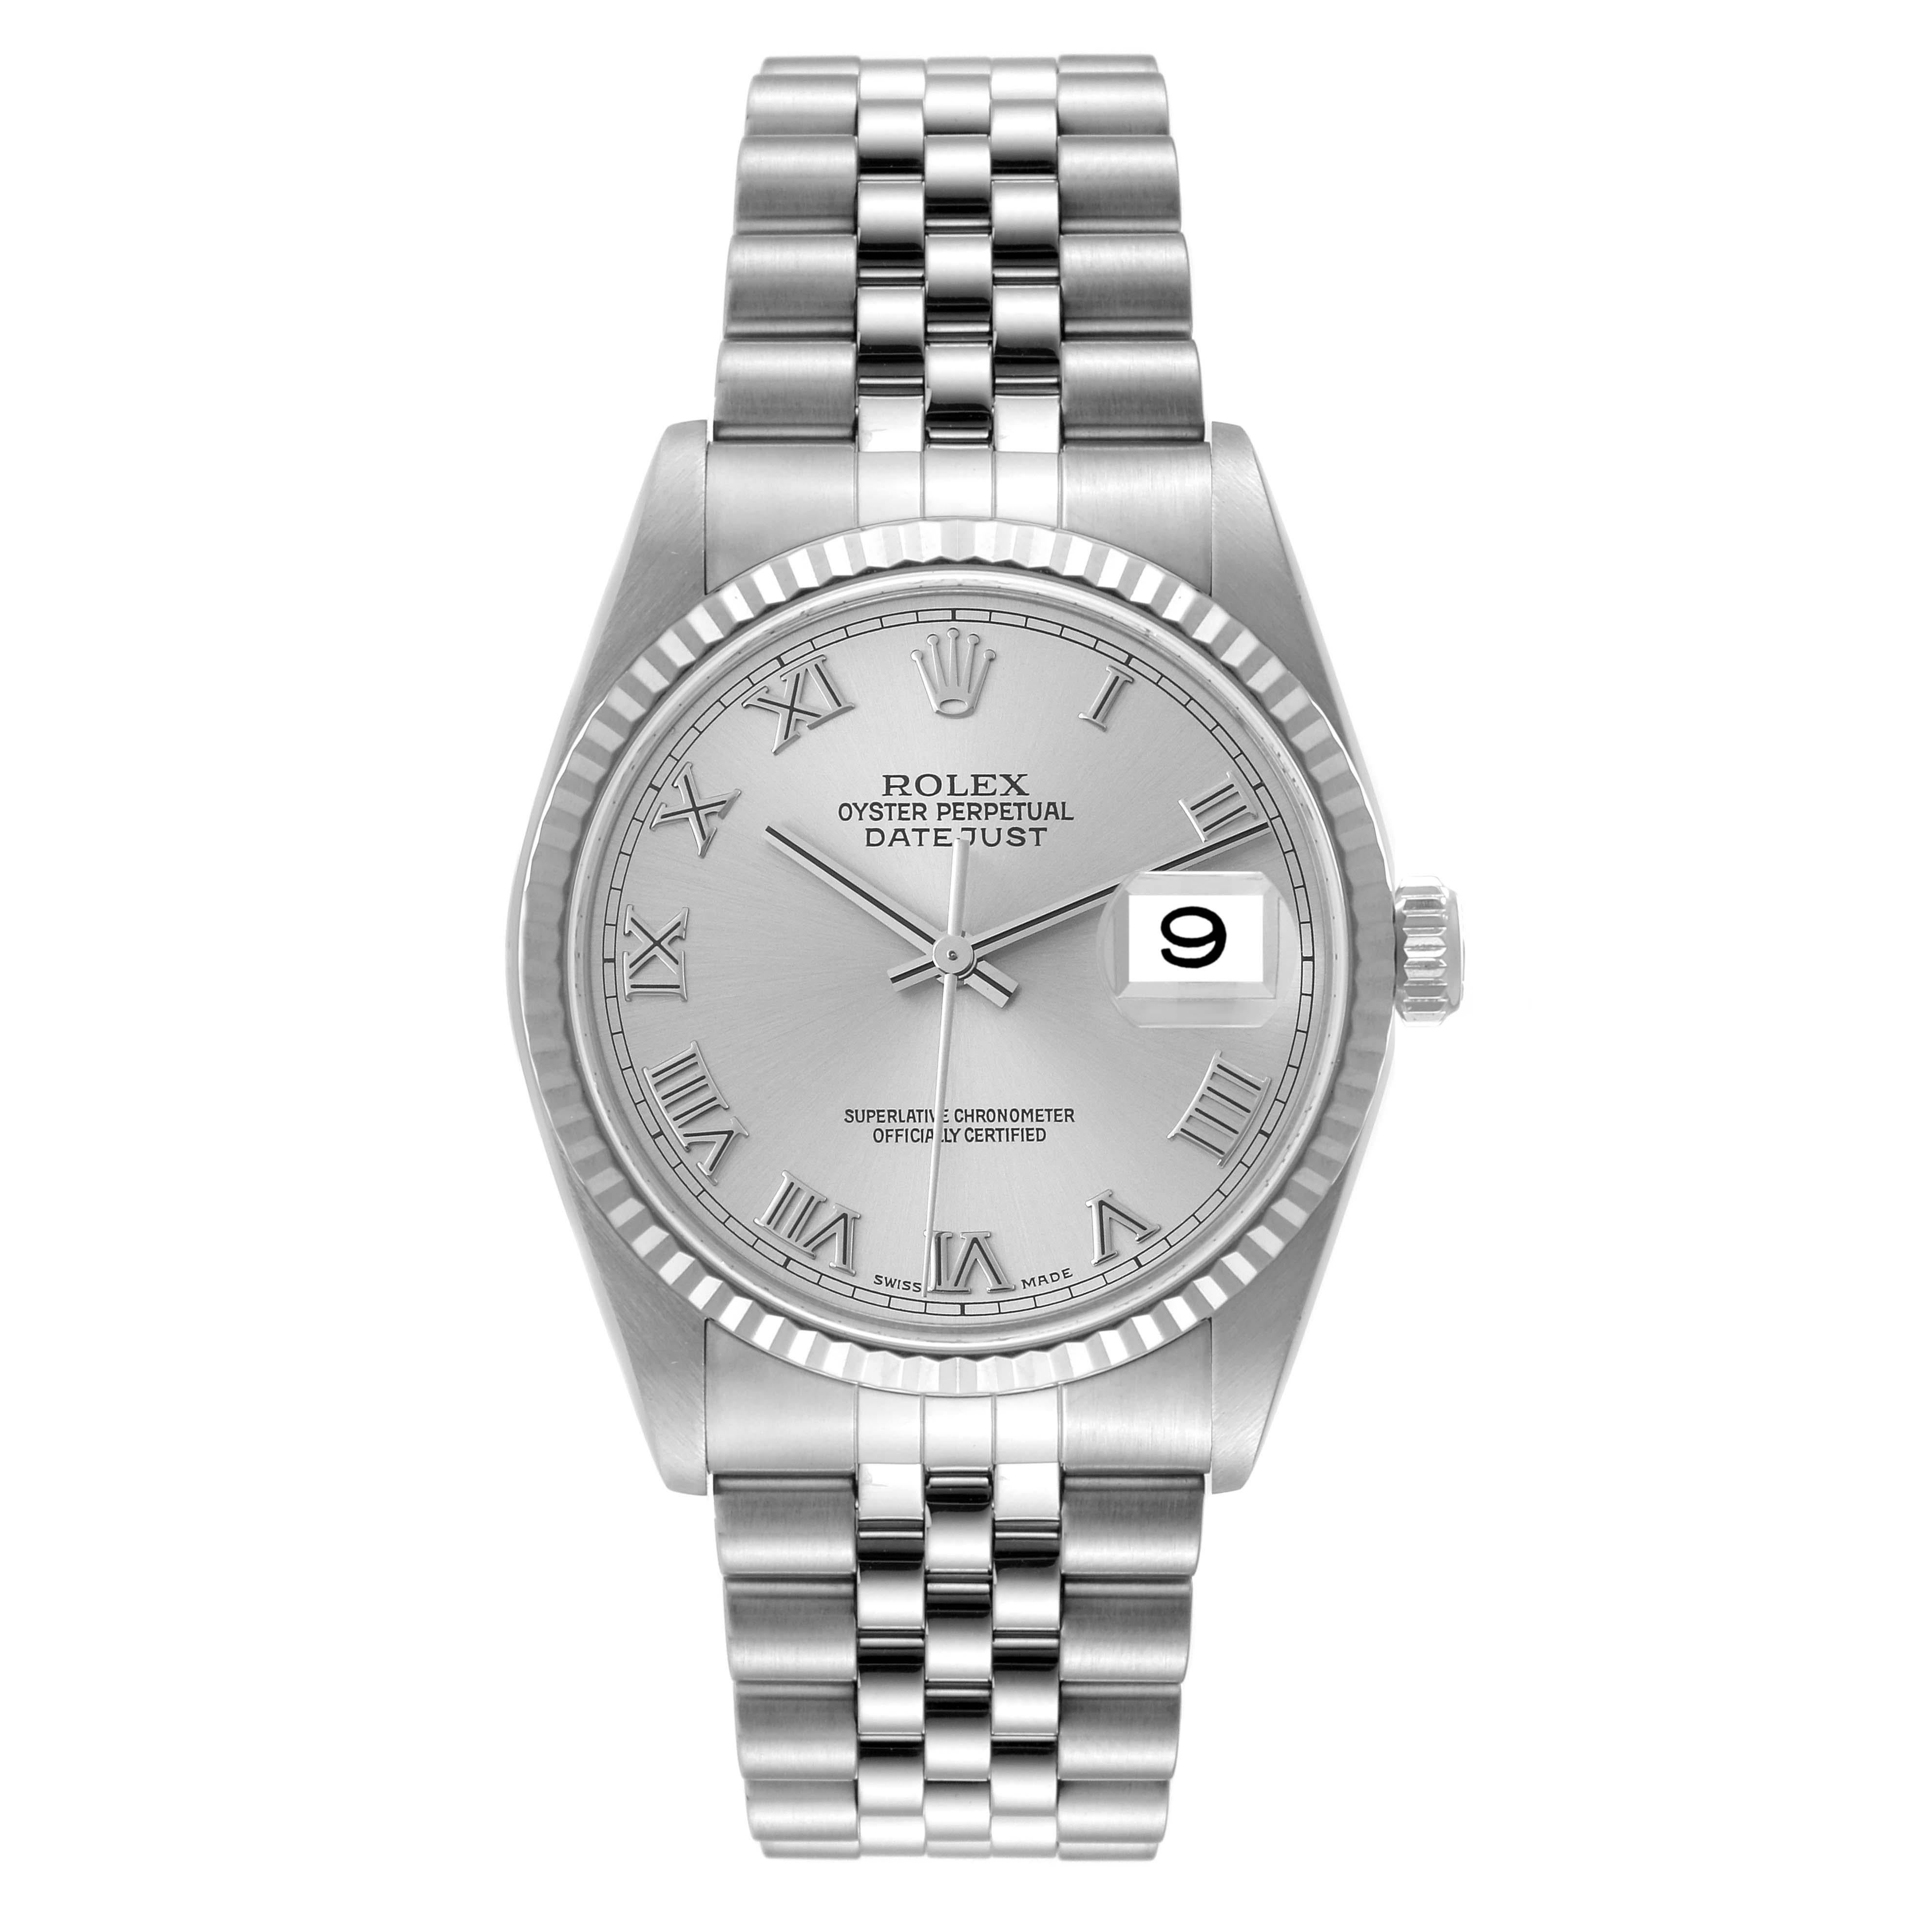 Rolex Datejust 36 Steel White Gold Silver Roman Dial Mens Watch 16234 Box Papers. Officially certified chronometer self-winding movement. Stainless steel oyster case 36 mm in diameter. Rolex logo on a crown. 18k white gold fluted bezel. Scratch